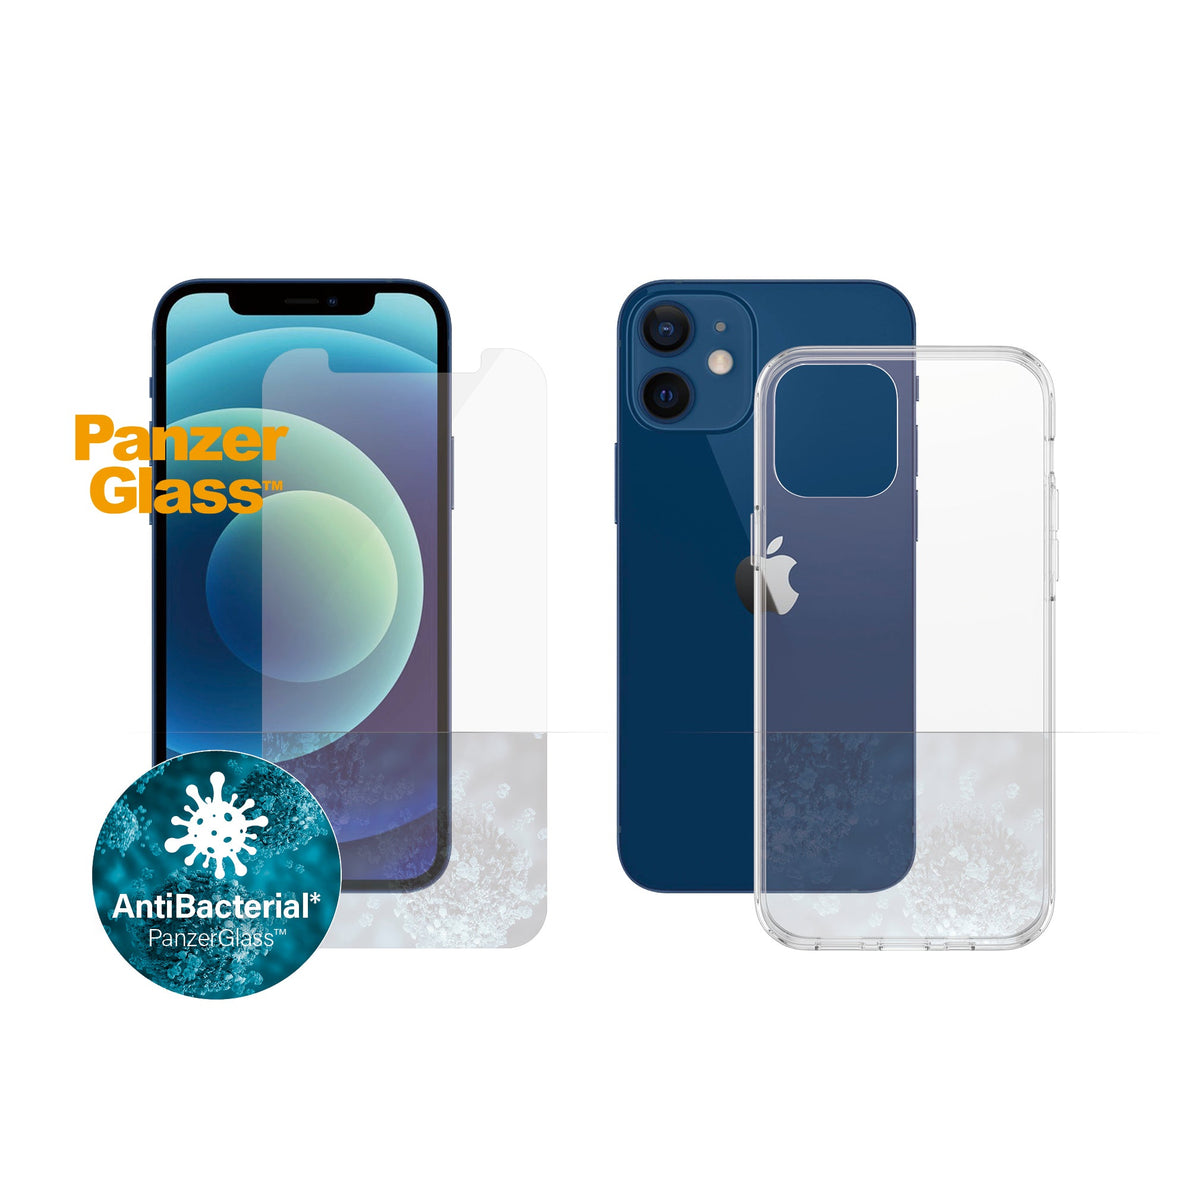 [OPEN BOX] PANZERGLASS iPhone 12 Mini - Clear Case with  Screen Protector Bundle - Full Protection Treated w/ Anti-Microbial